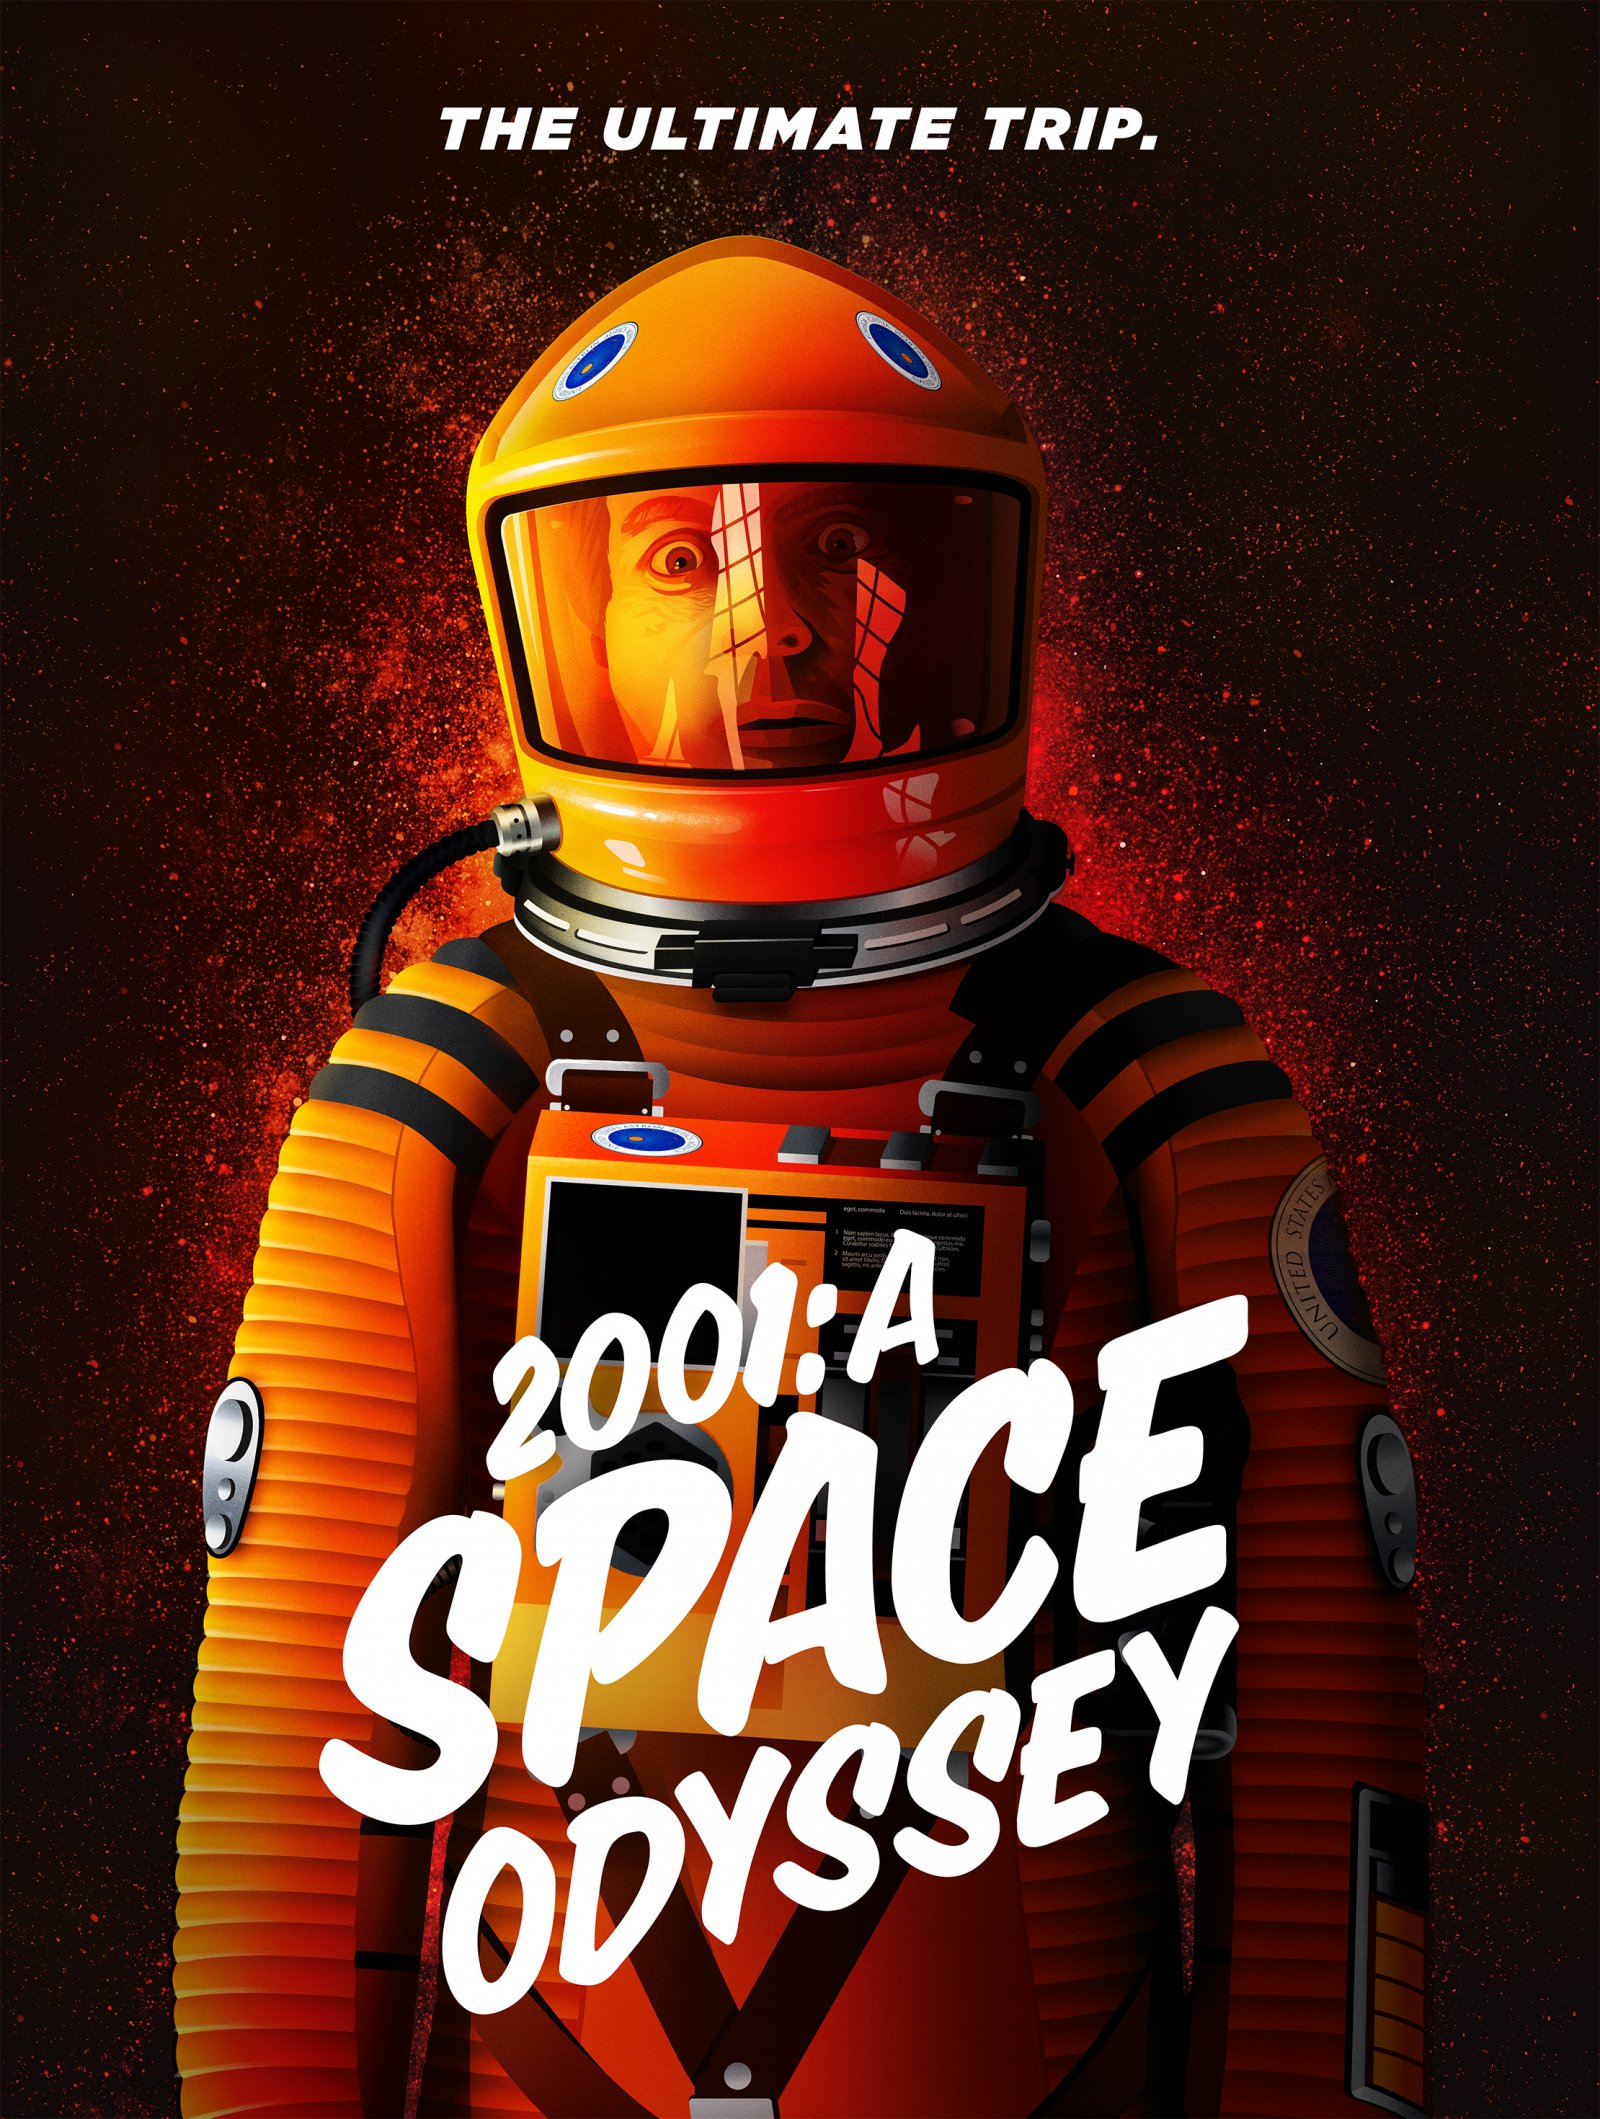 2001 space odyssey poster